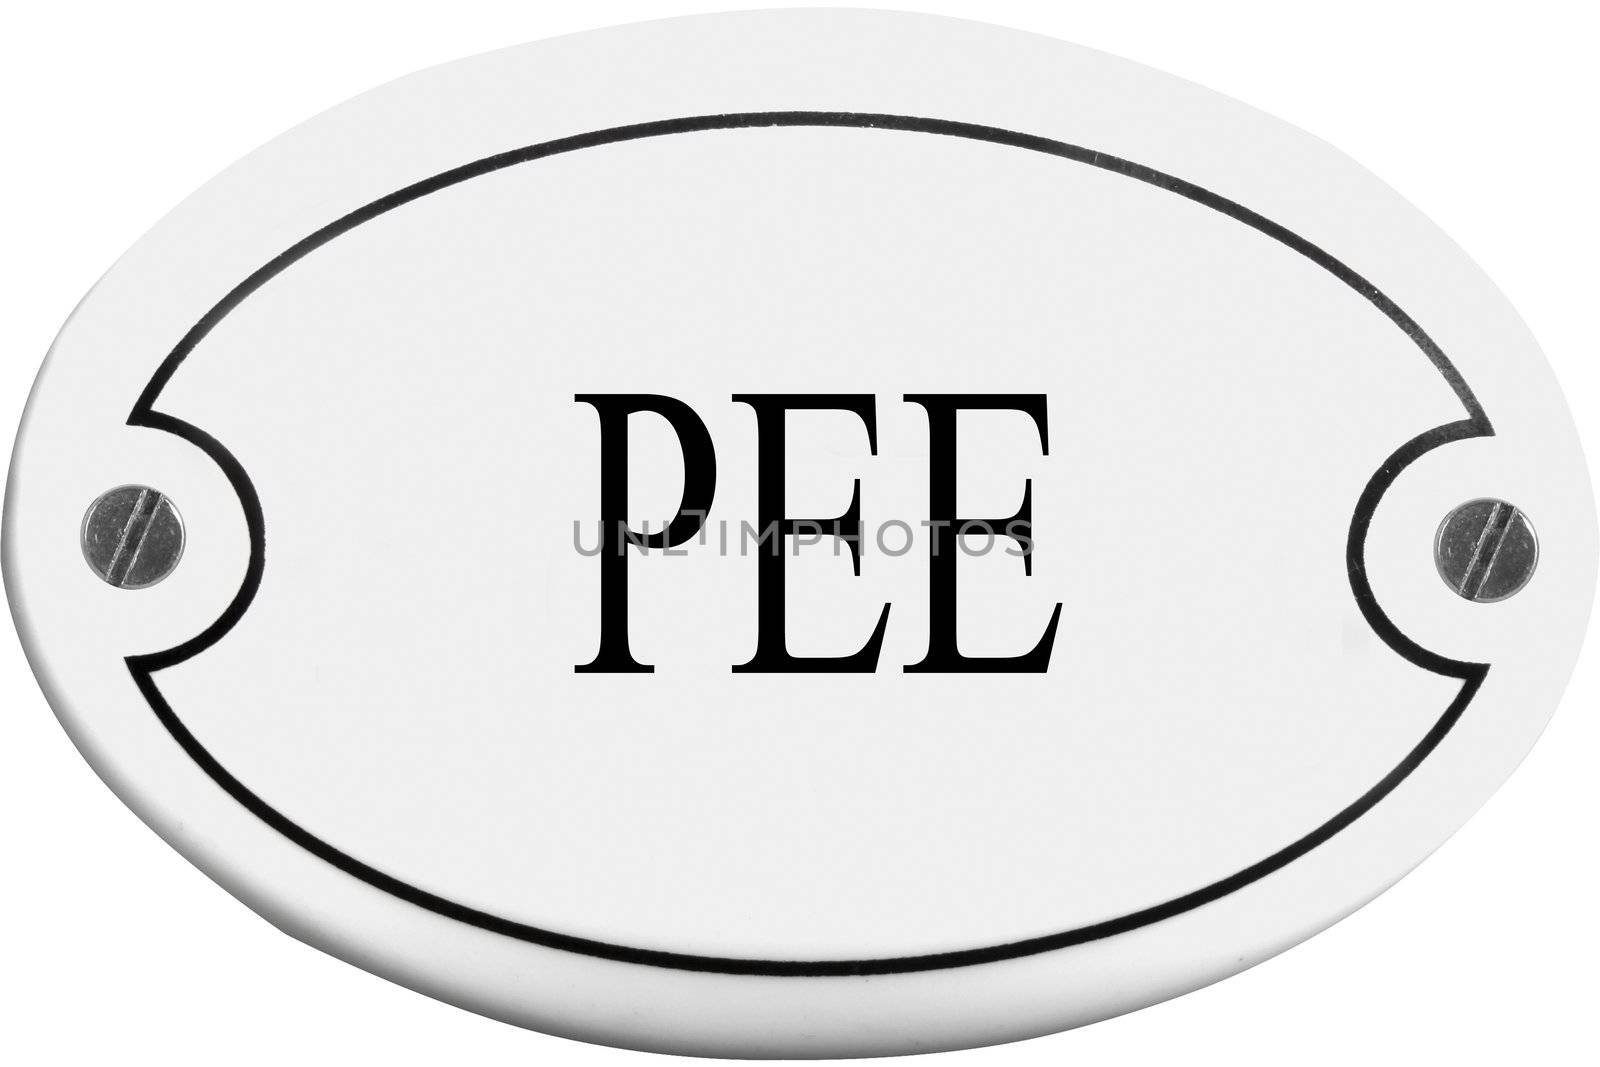 Old-fashioned door name plate  with text pee